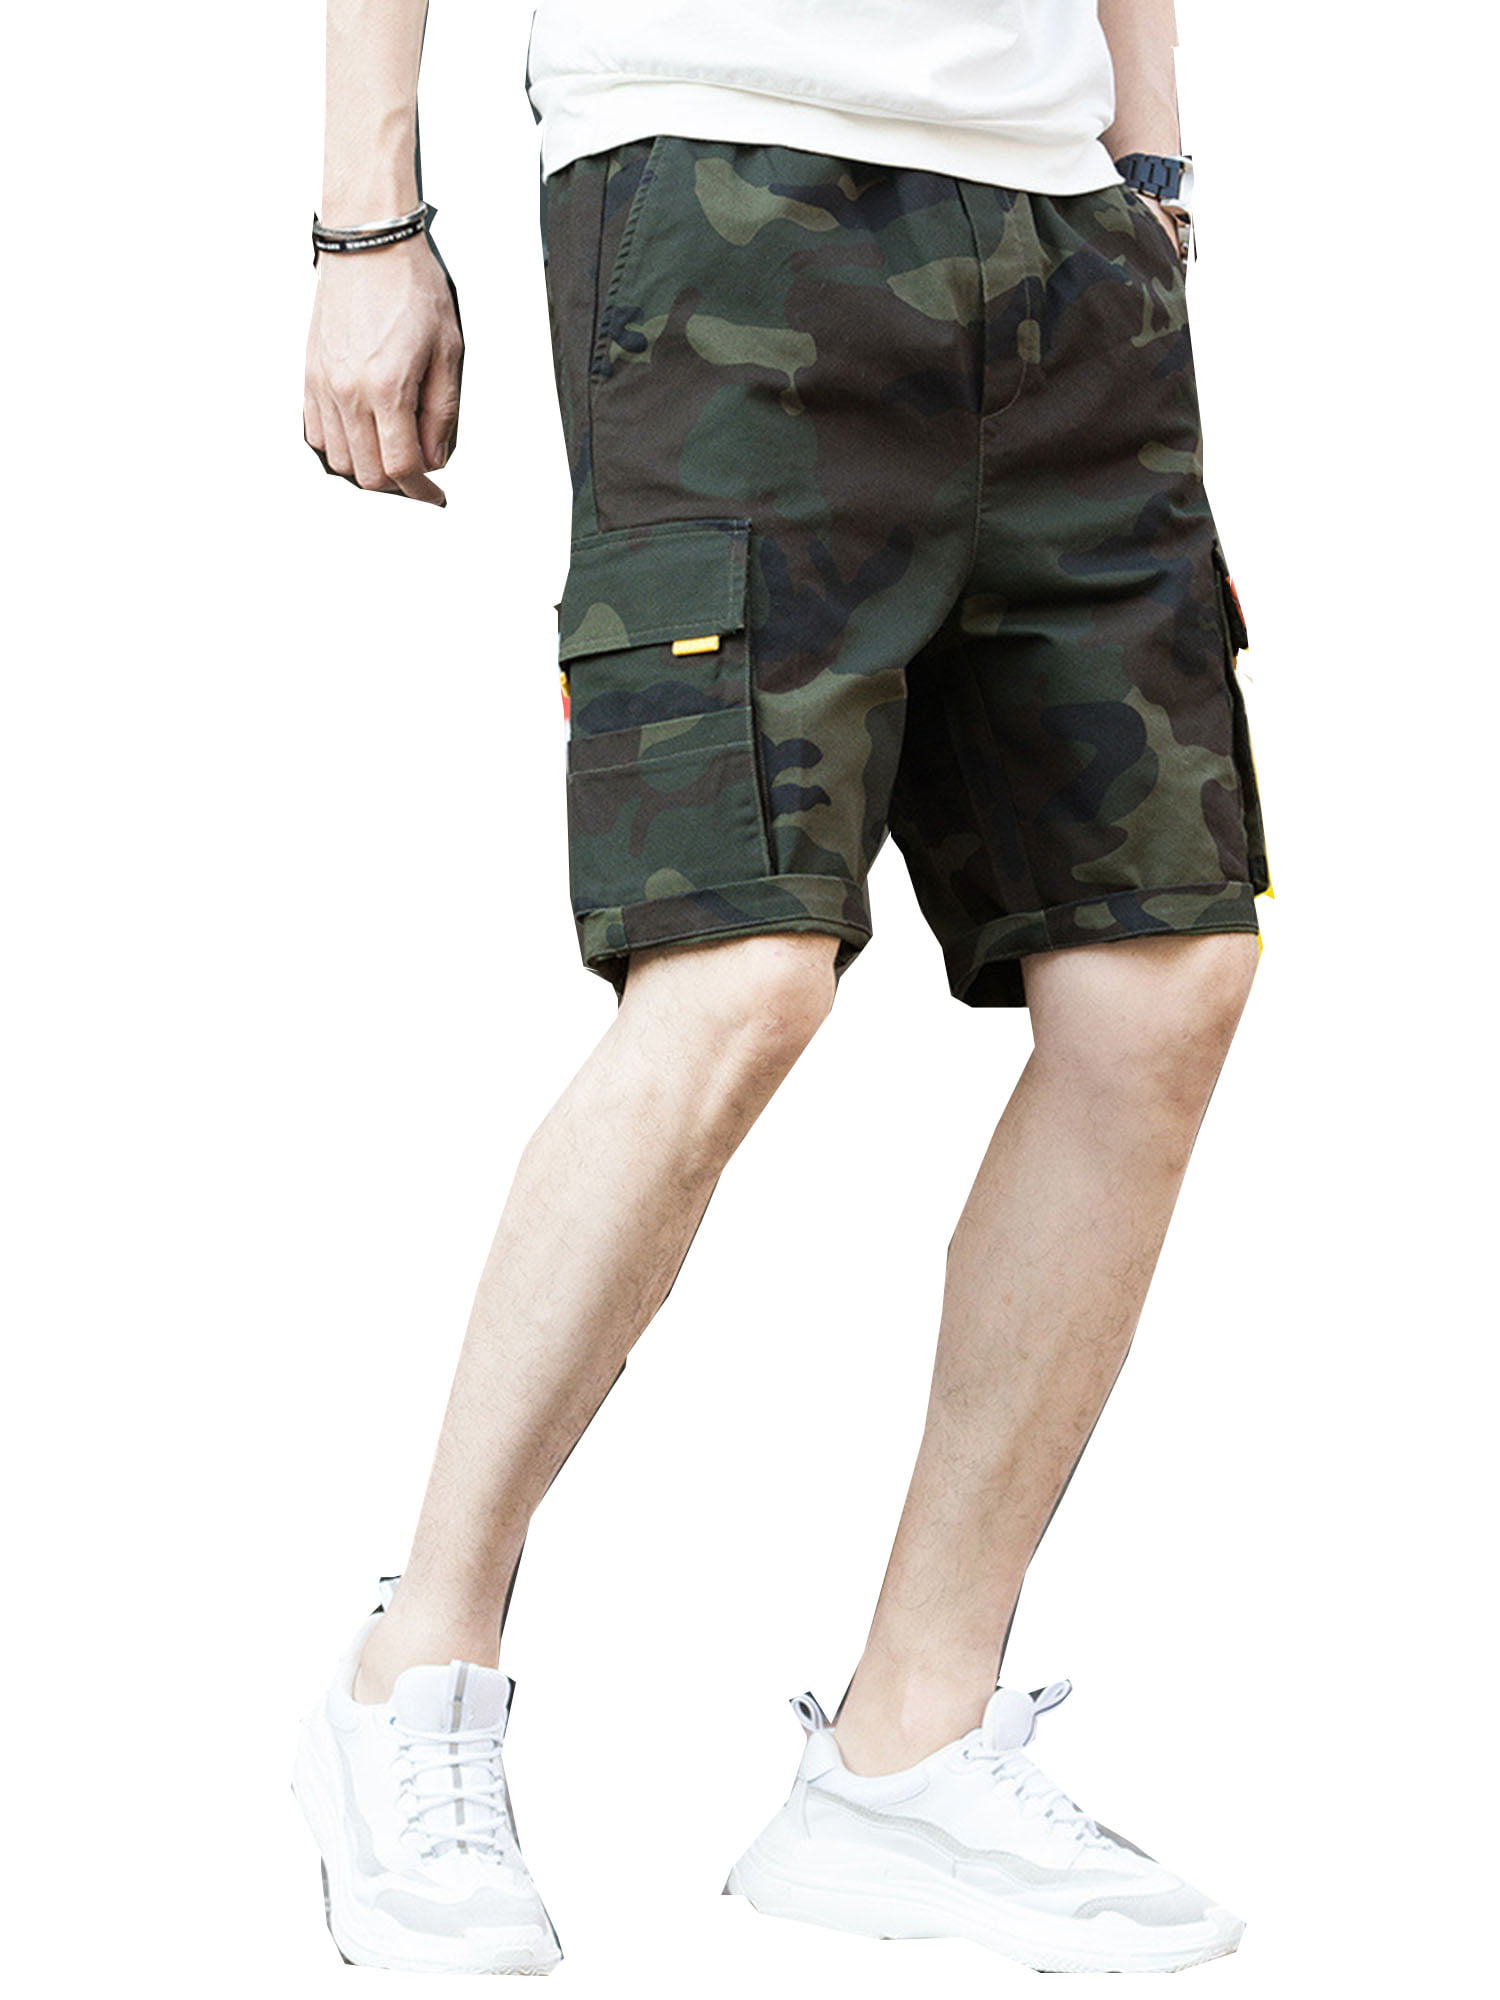 Move on Men Camouflage Drawstring Shorts Summer Sports Fitness Fifth Pants 